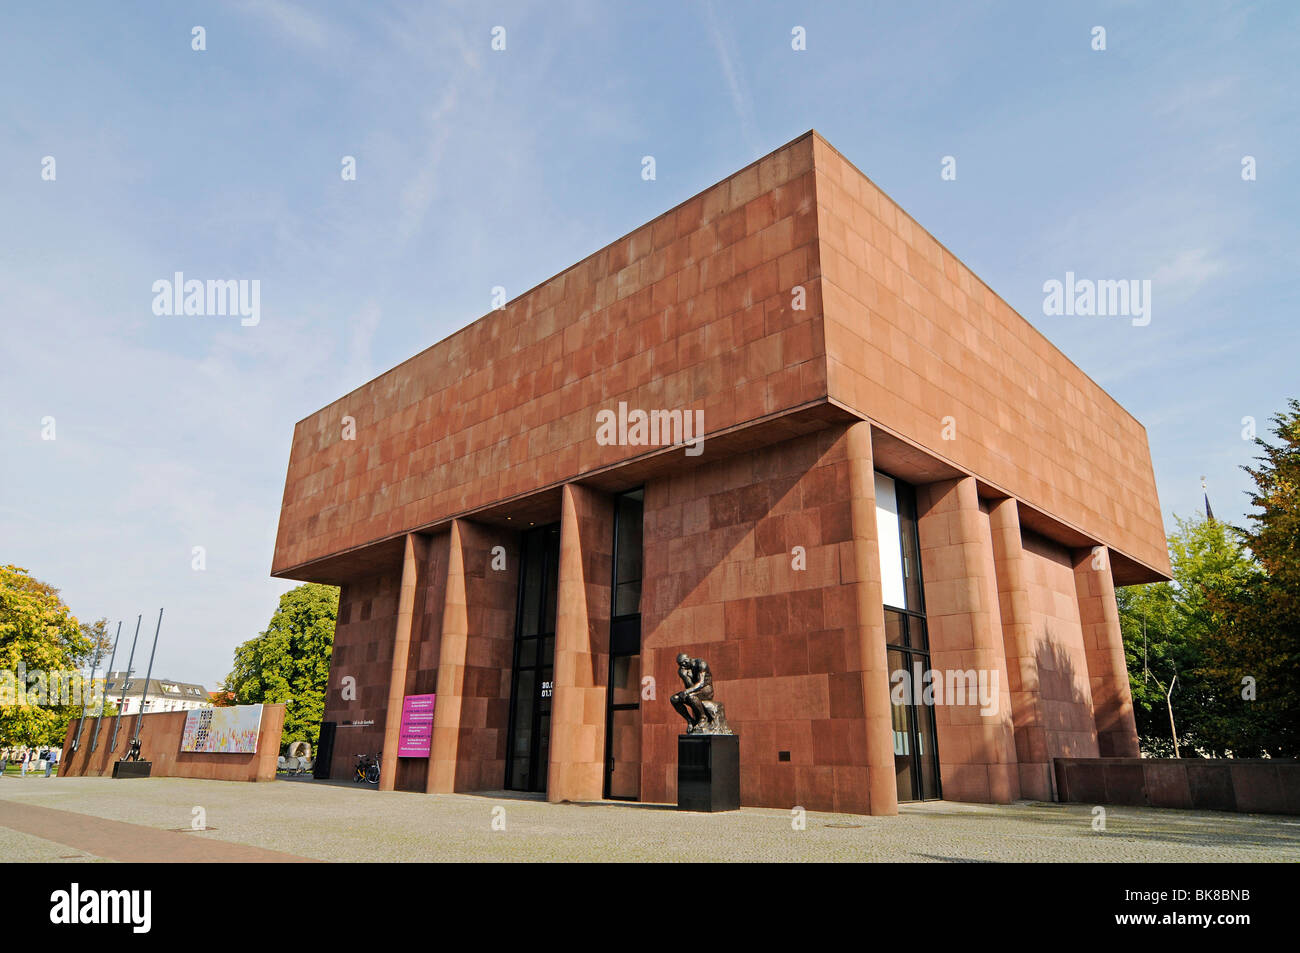 Kunsthalle Bielefeld High Resolution Stock Photography and Images - Alamy